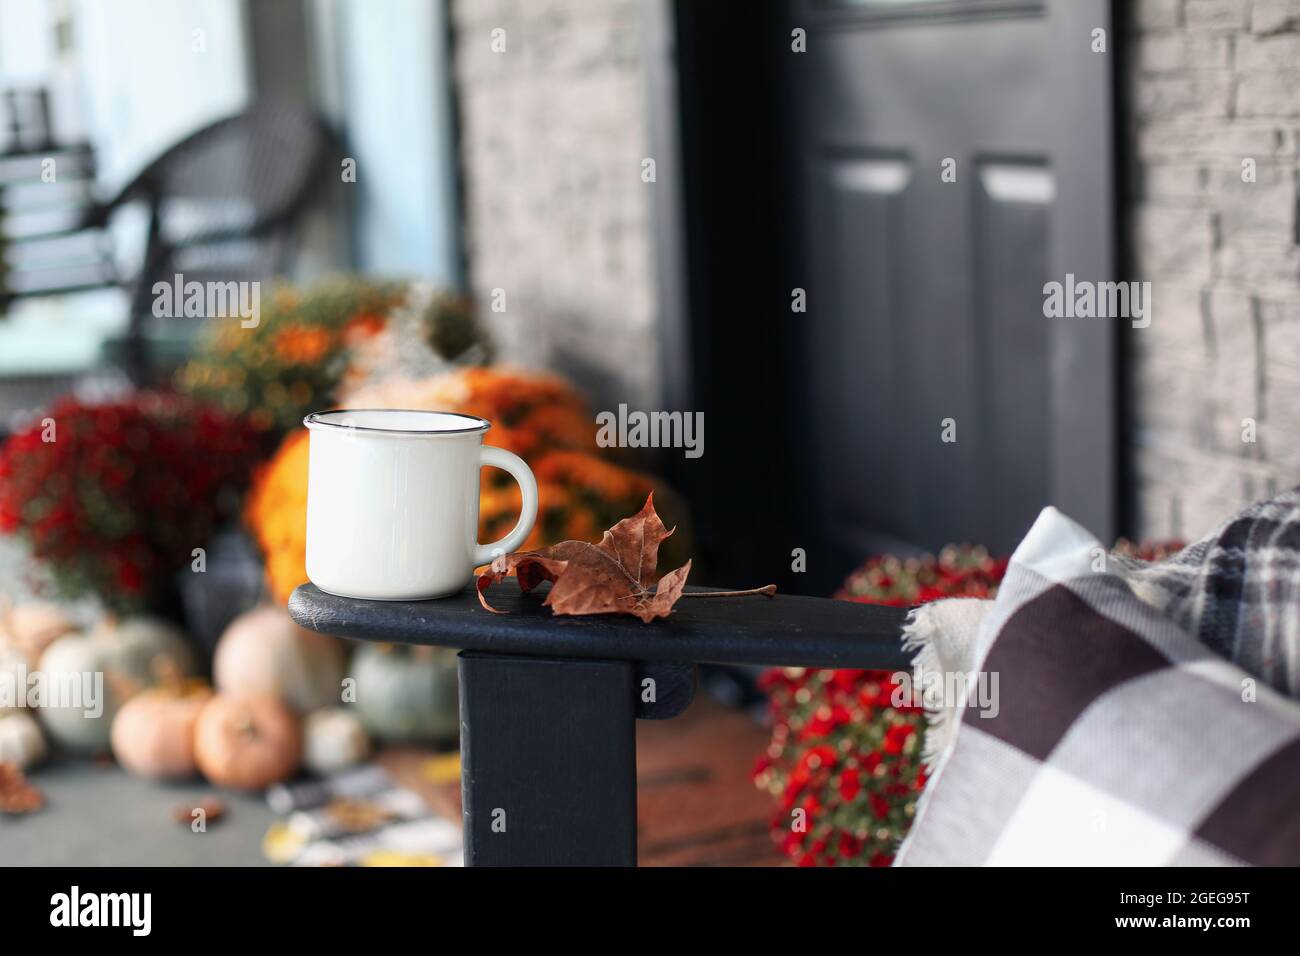 Steaming coffee cup sitting on arm of rocking chair on a front porch that has been decorated for autumn with heirloom white, orange and grey pumpkins Stock Photo